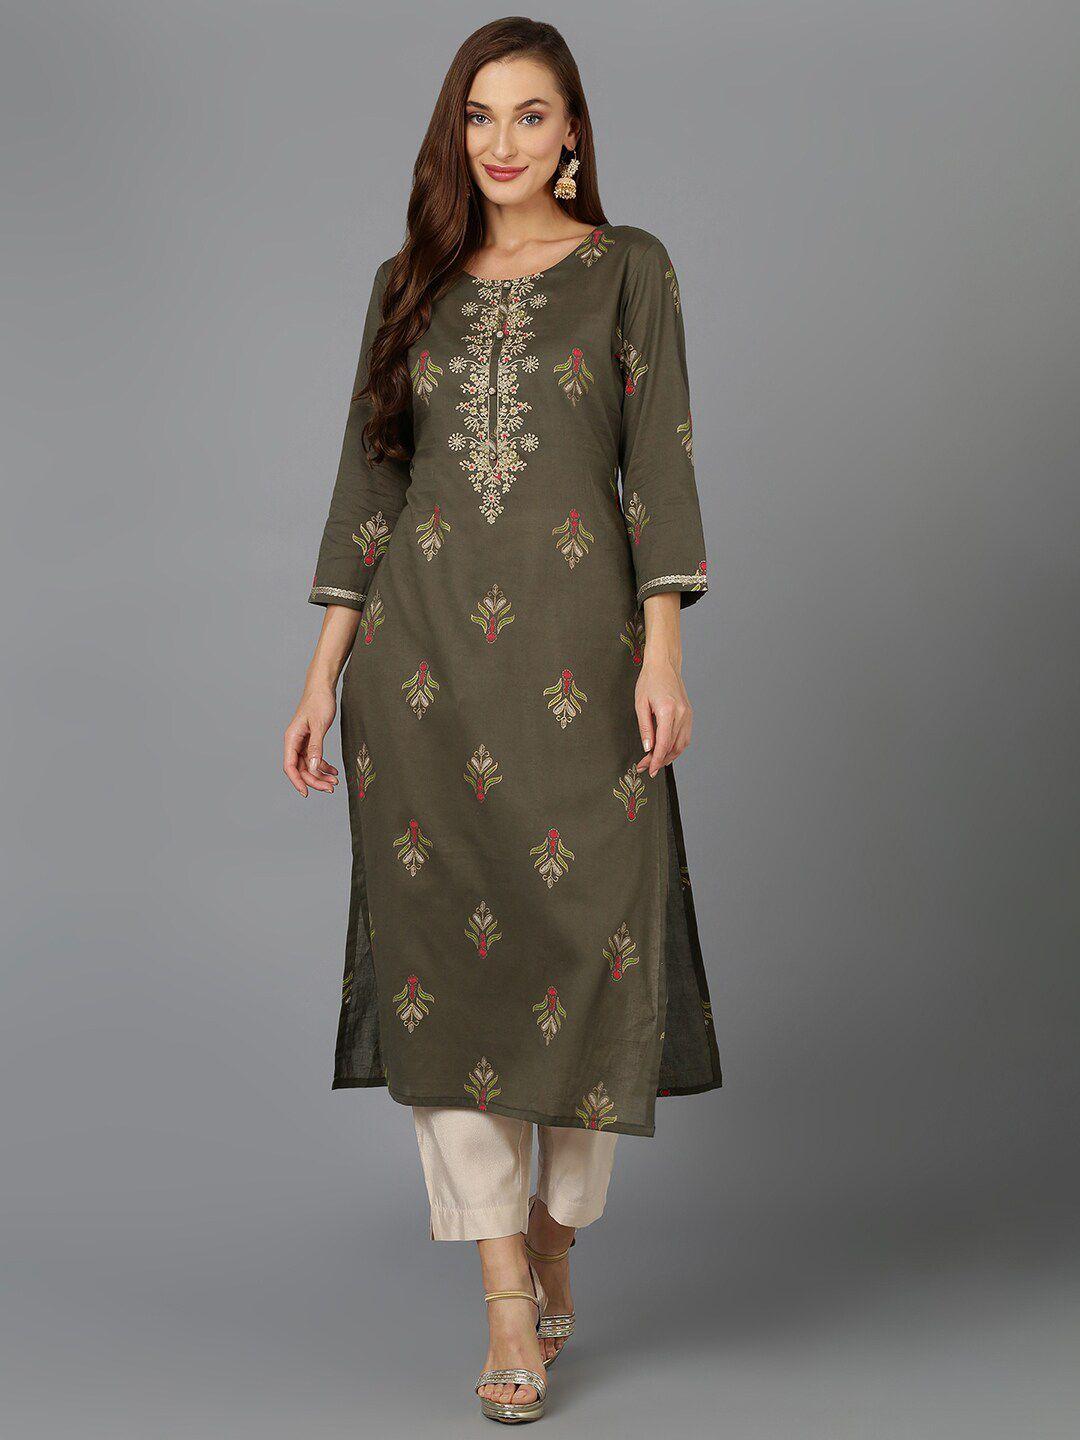 ahika olive green ethnic motifs embroidered sequined cotton kurta